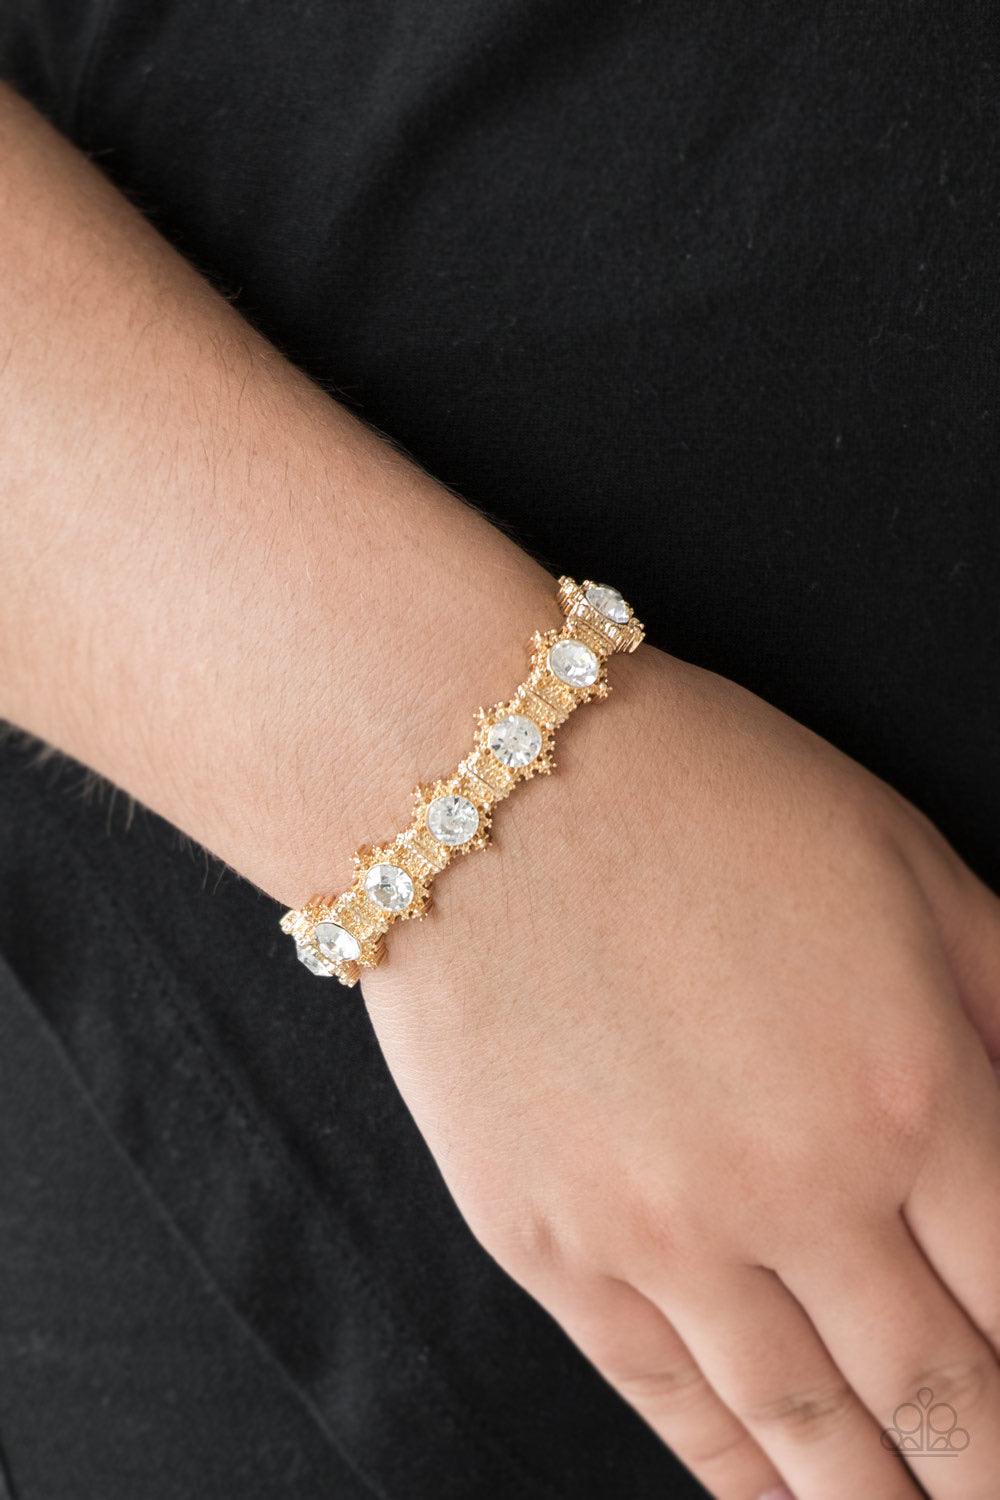 Paparazzi Accessories Strut Your Stuff - Gold Featuring glittery white rhinestone centers, ornate golden frames are threaded along stretchy bands, linking across the wrist for a refined look. Jewelry